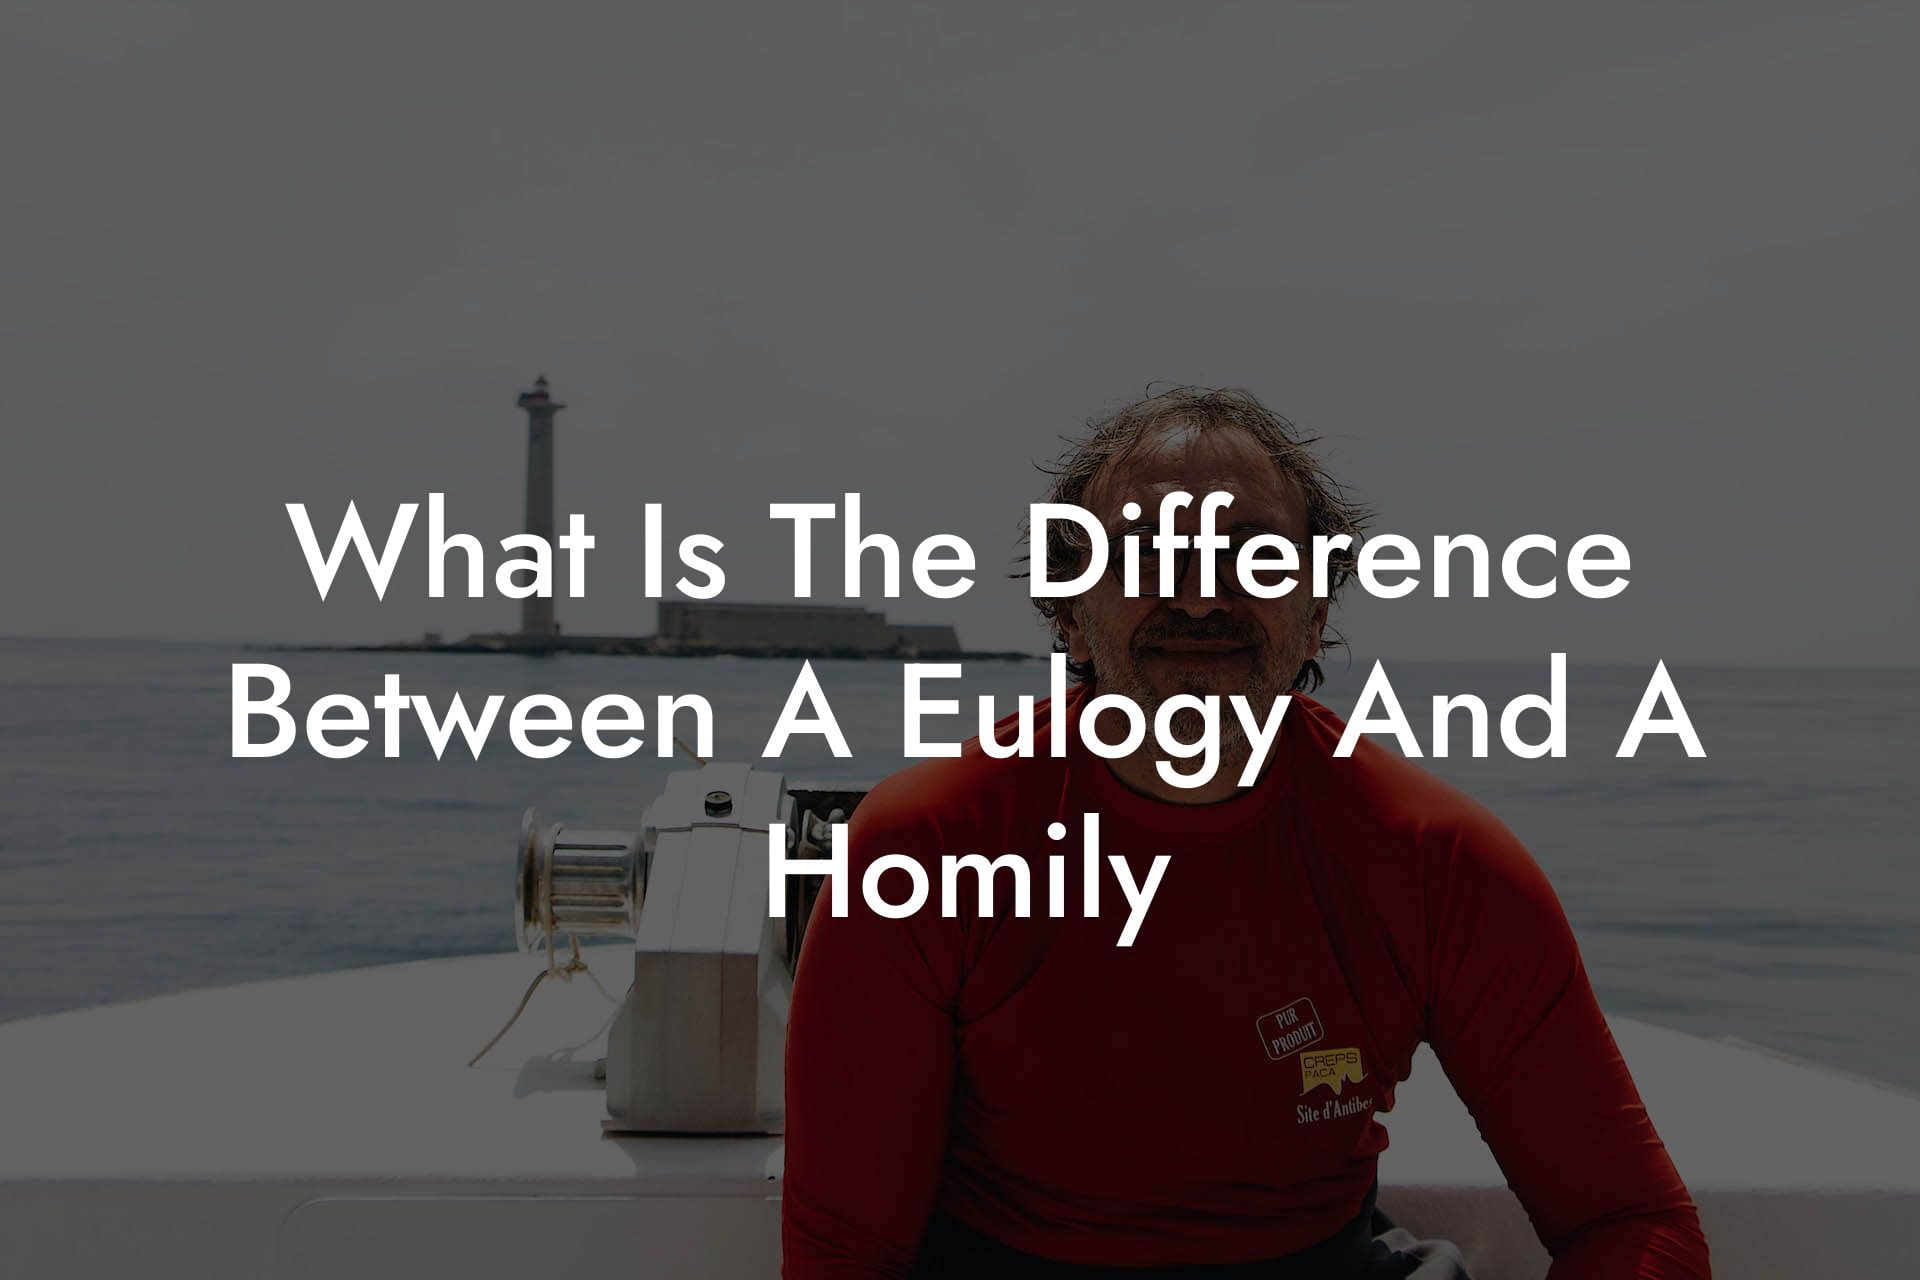 What Is The Difference Between A Eulogy And A Homily